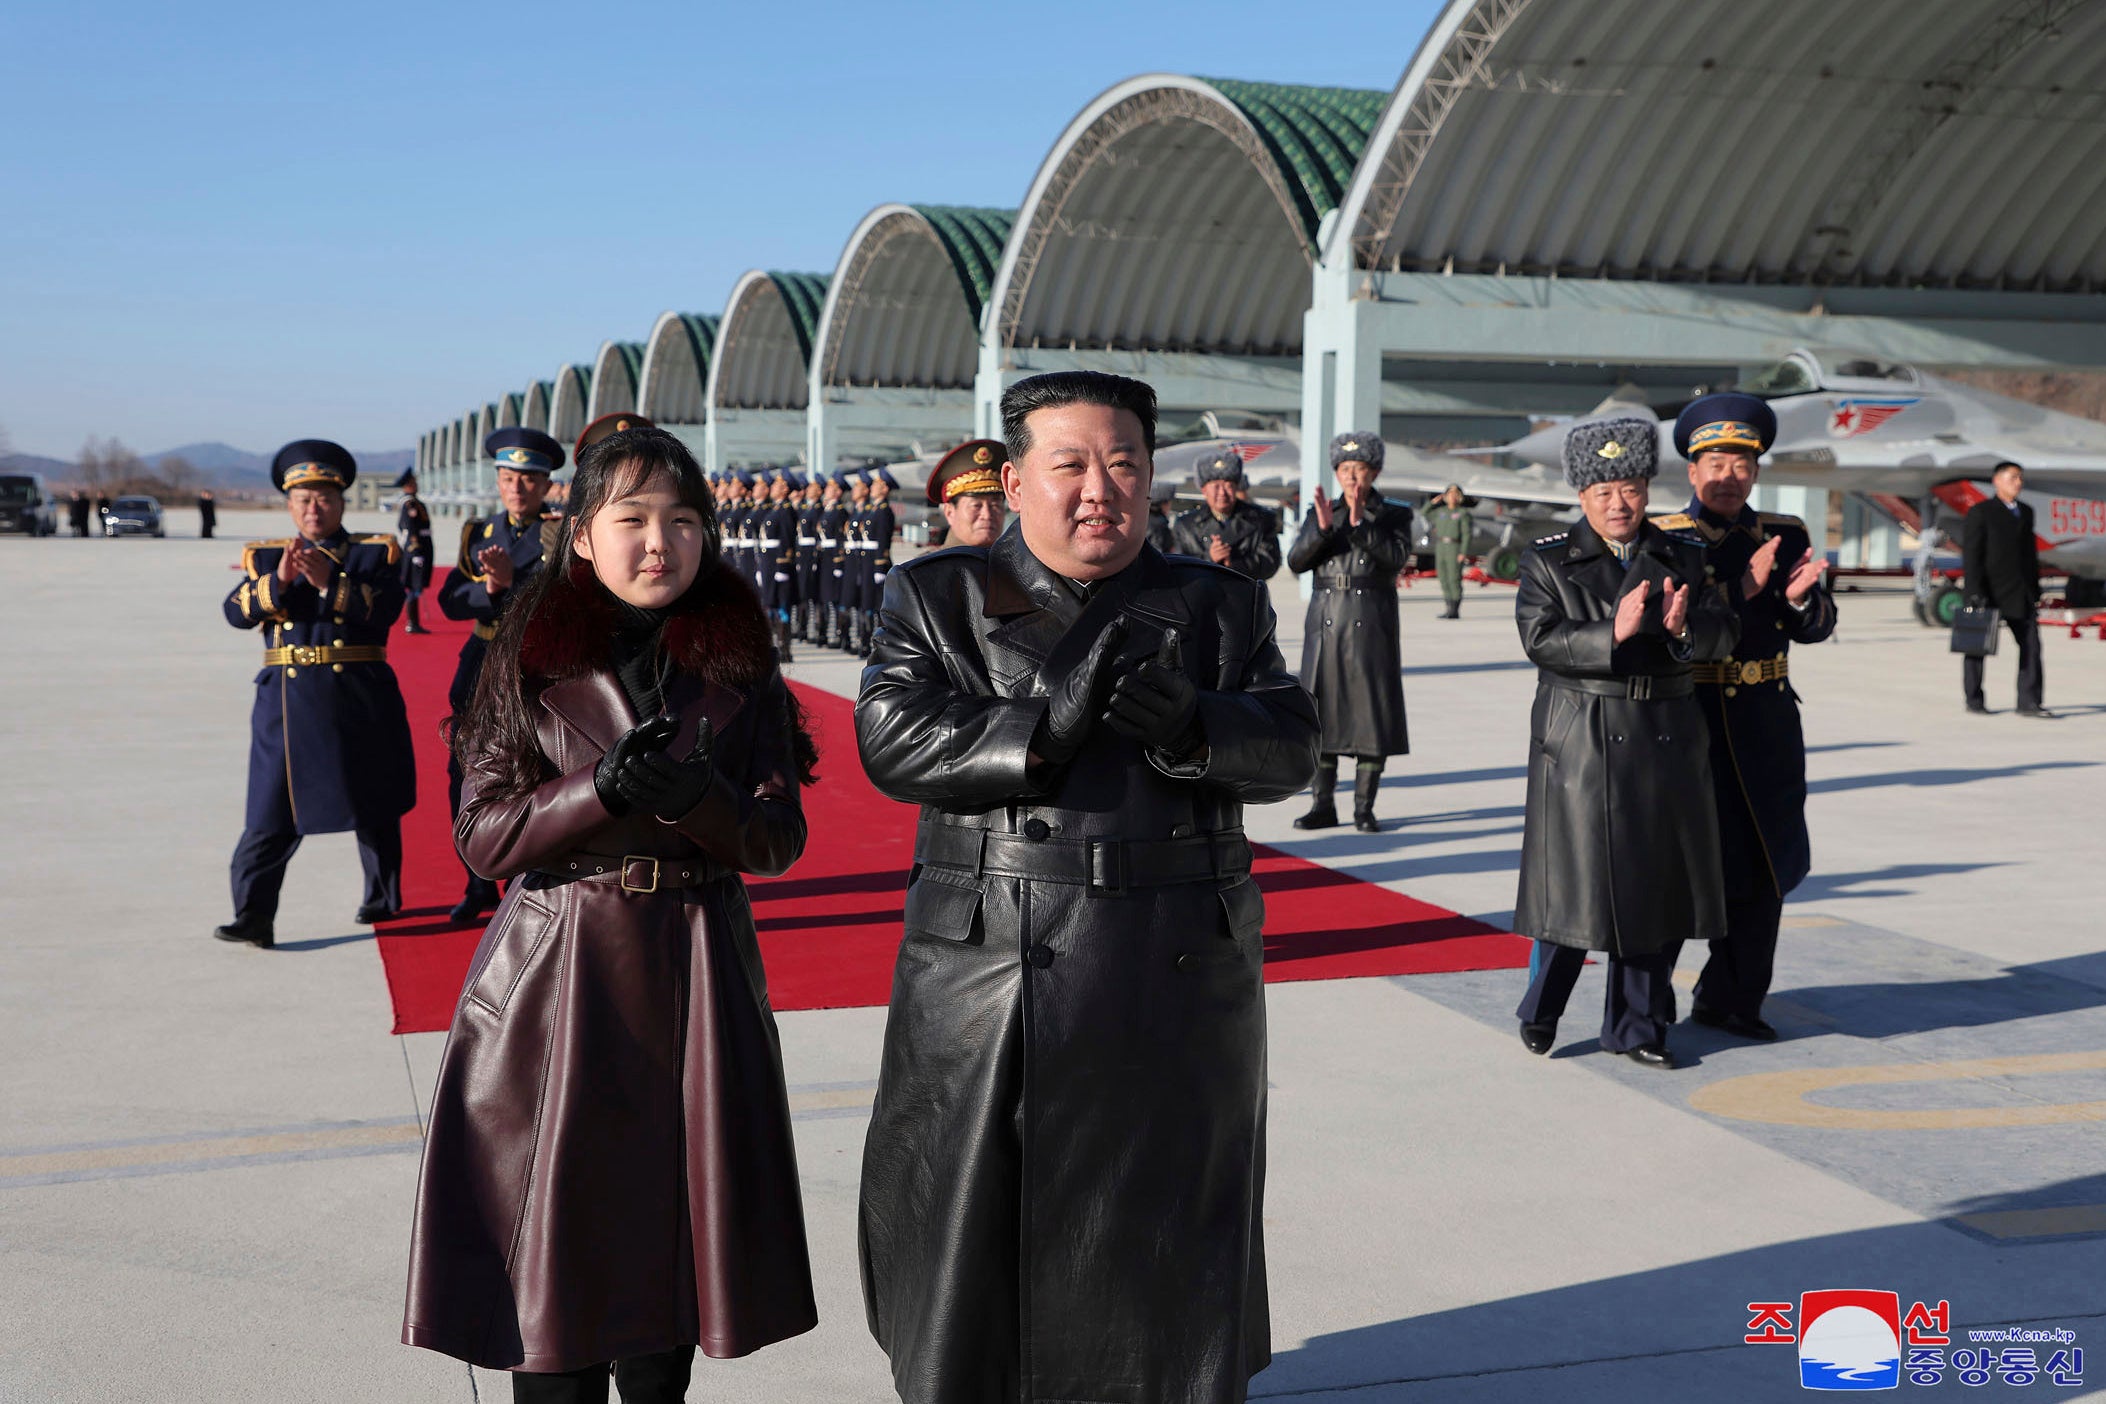 North Korean leader Kim Jong-un and his daughter visit an air force command post to commemorate what the country calls the ‘Day of Airmen’